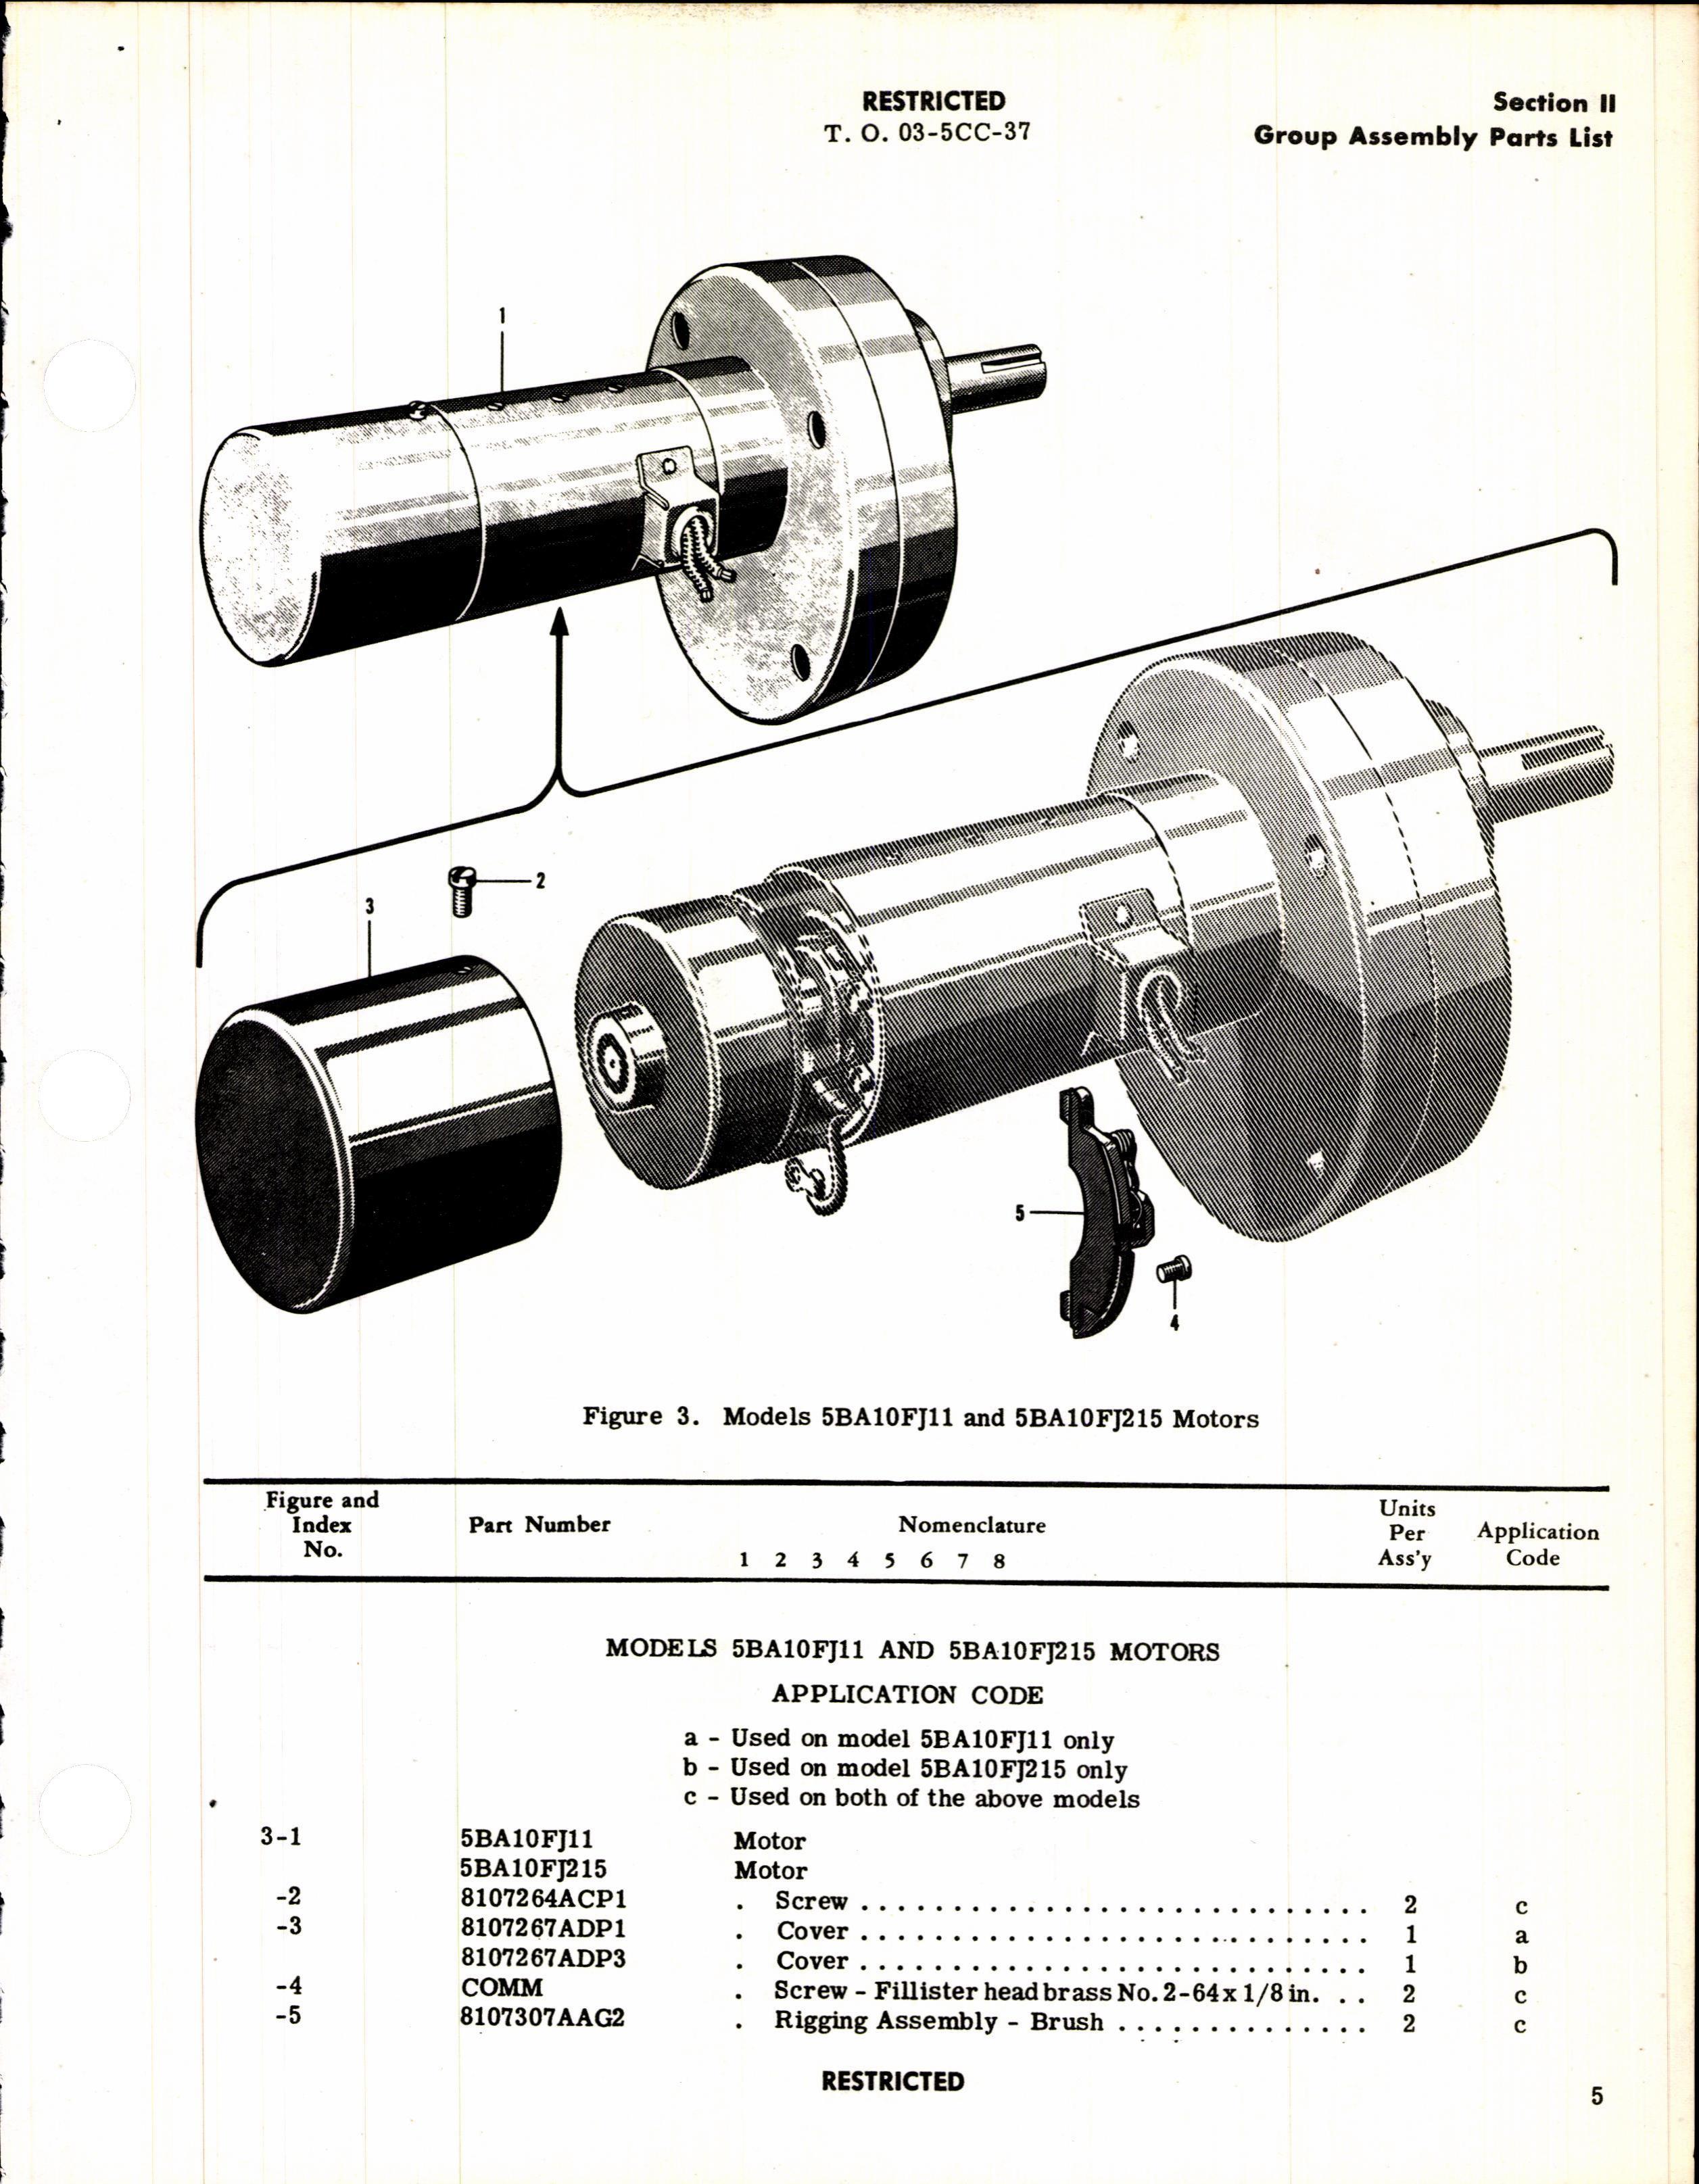 Sample page 7 from AirCorps Library document: Parts Catalog for General Electric Series 5BA10 Aircraft Motor